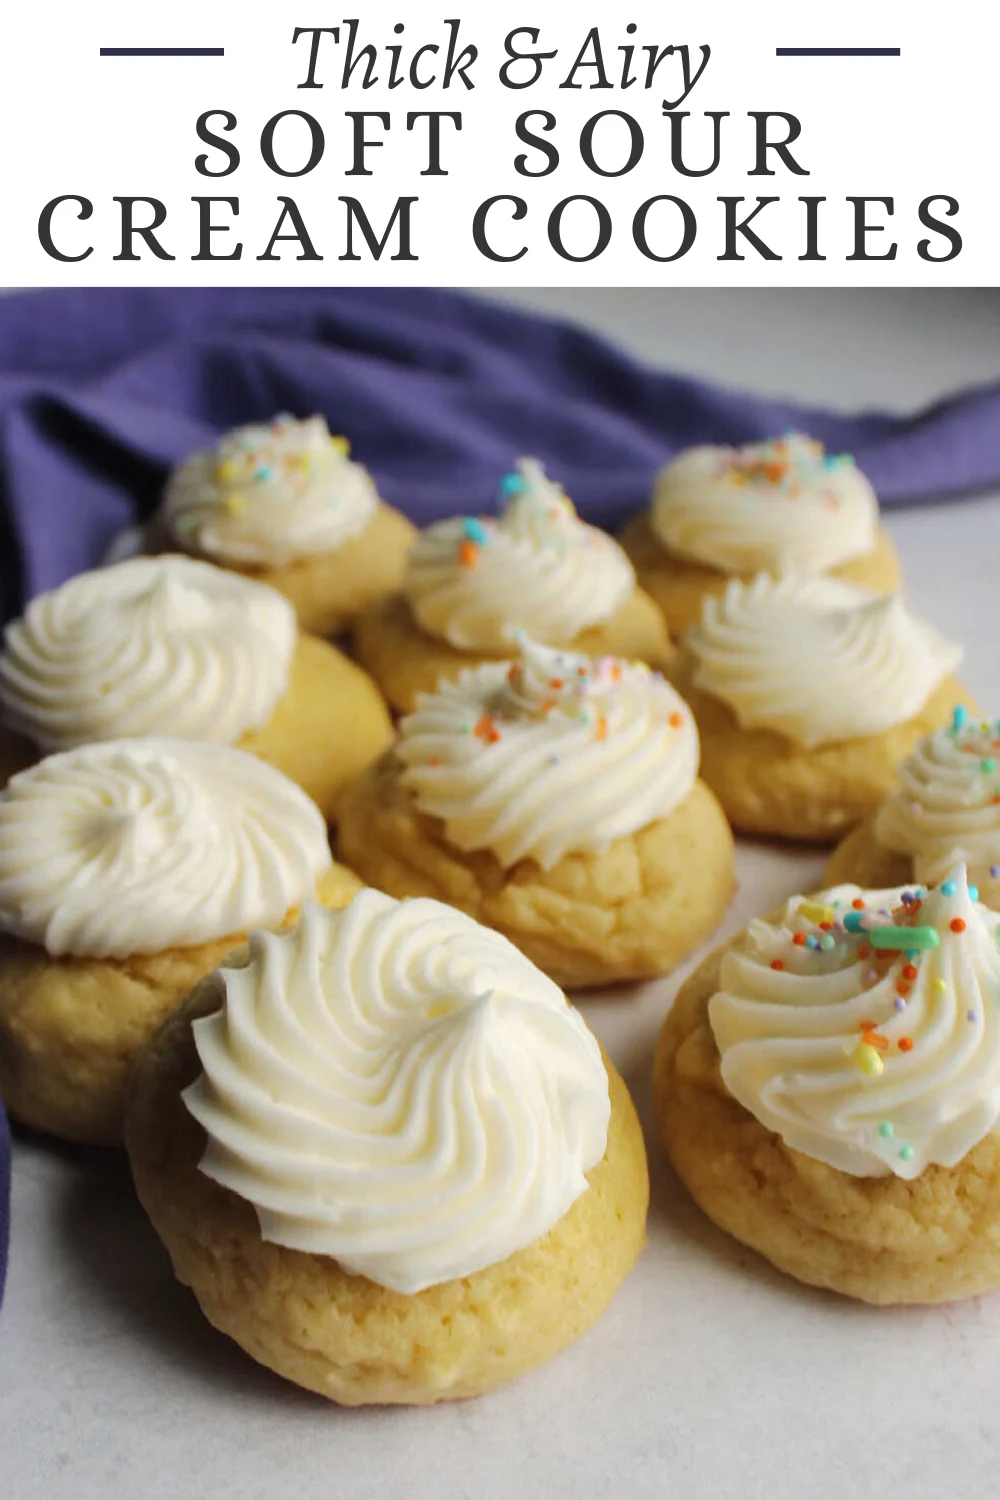 These soft sour cream cookies are simple to make and oh so good. We fell in love at first bite with these yummy drop cookies so many years ago and they are still one of our favorite cookies!